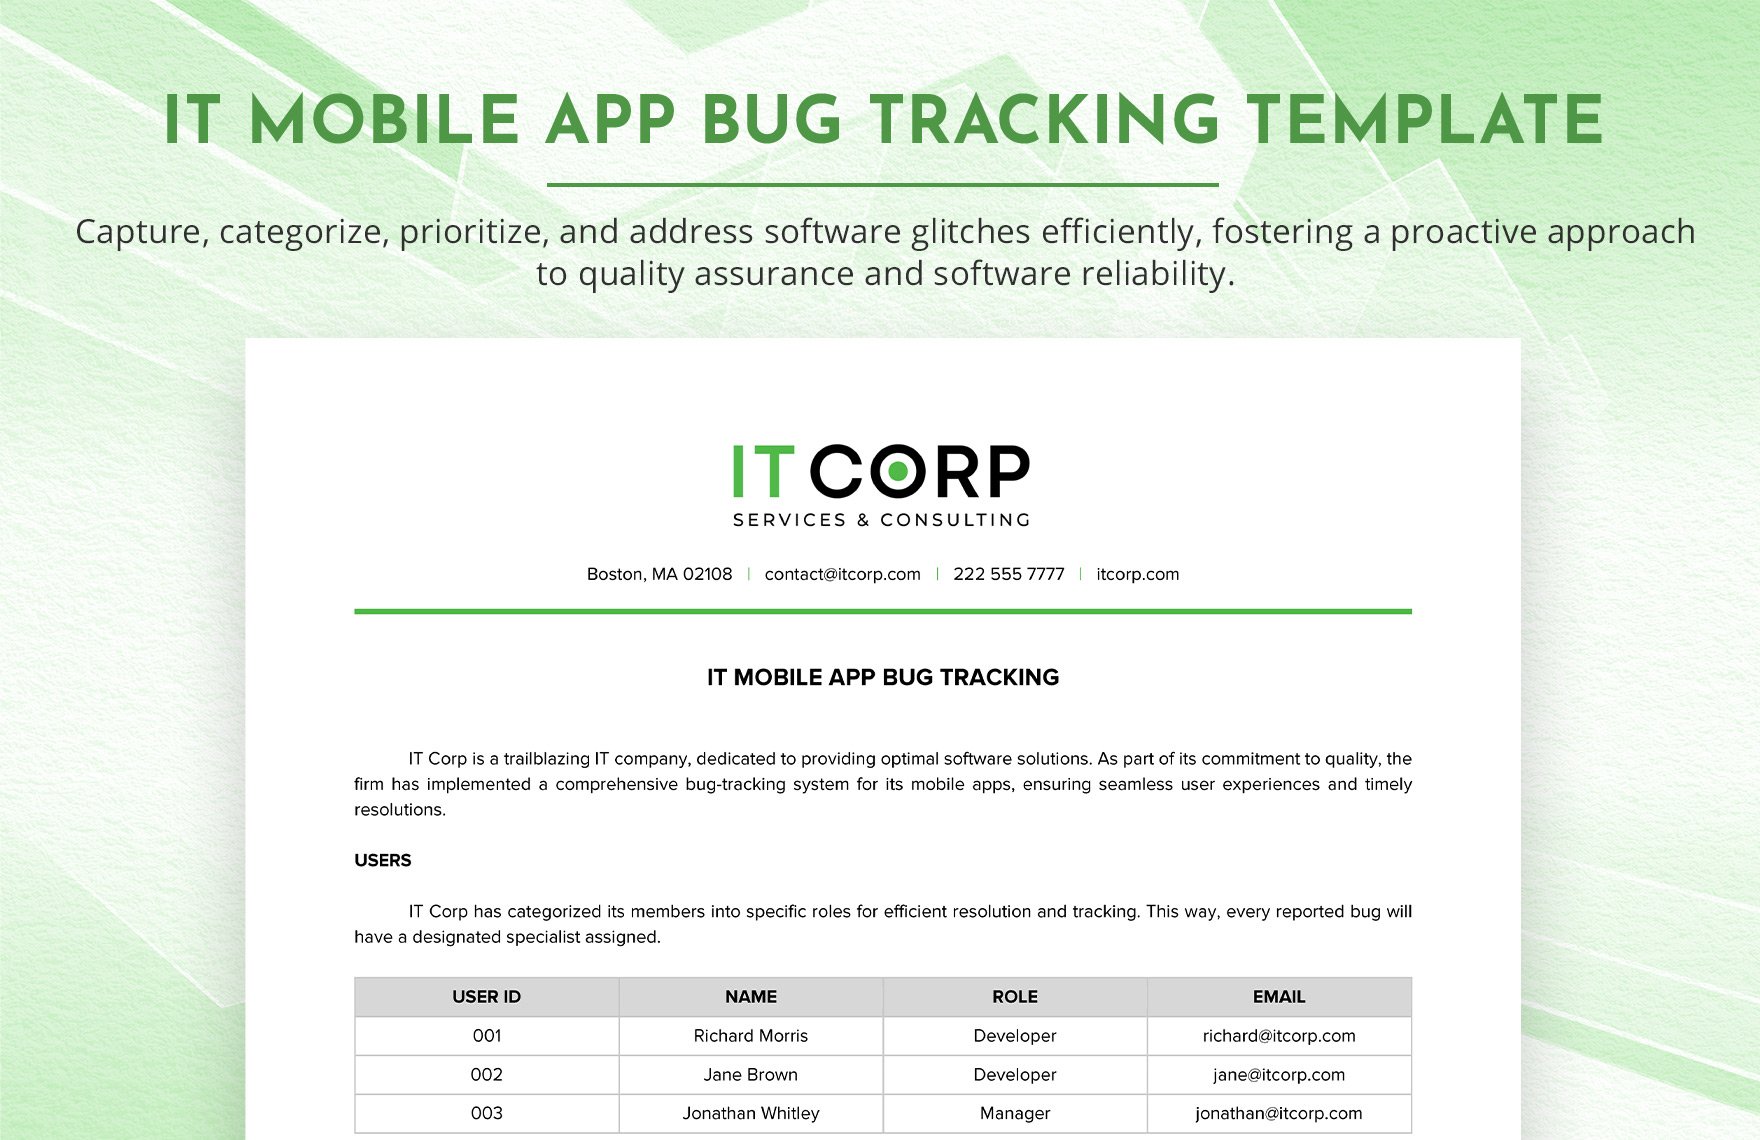 IT Mobile App Bug Tracking Template